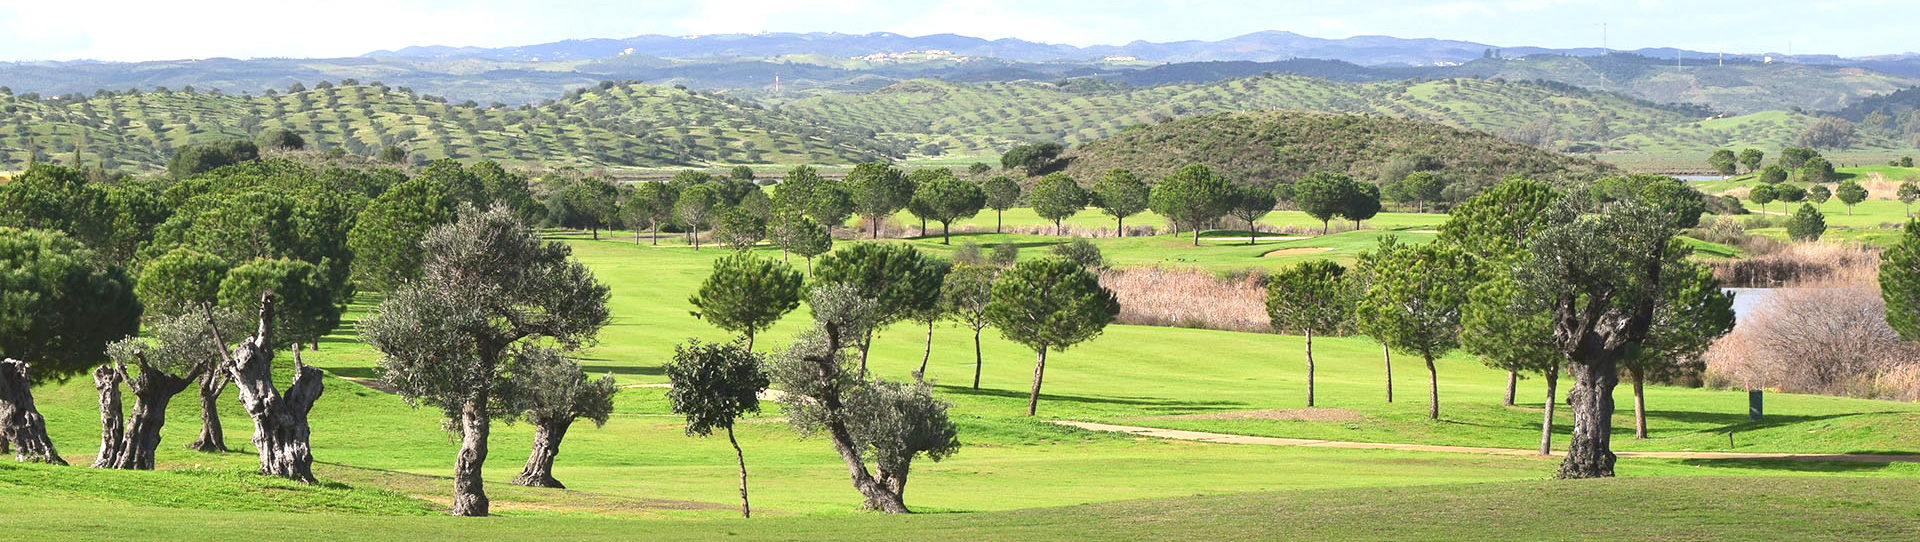 Portugal golf courses - Valle Guadiana Links (Spain) - Photo 1